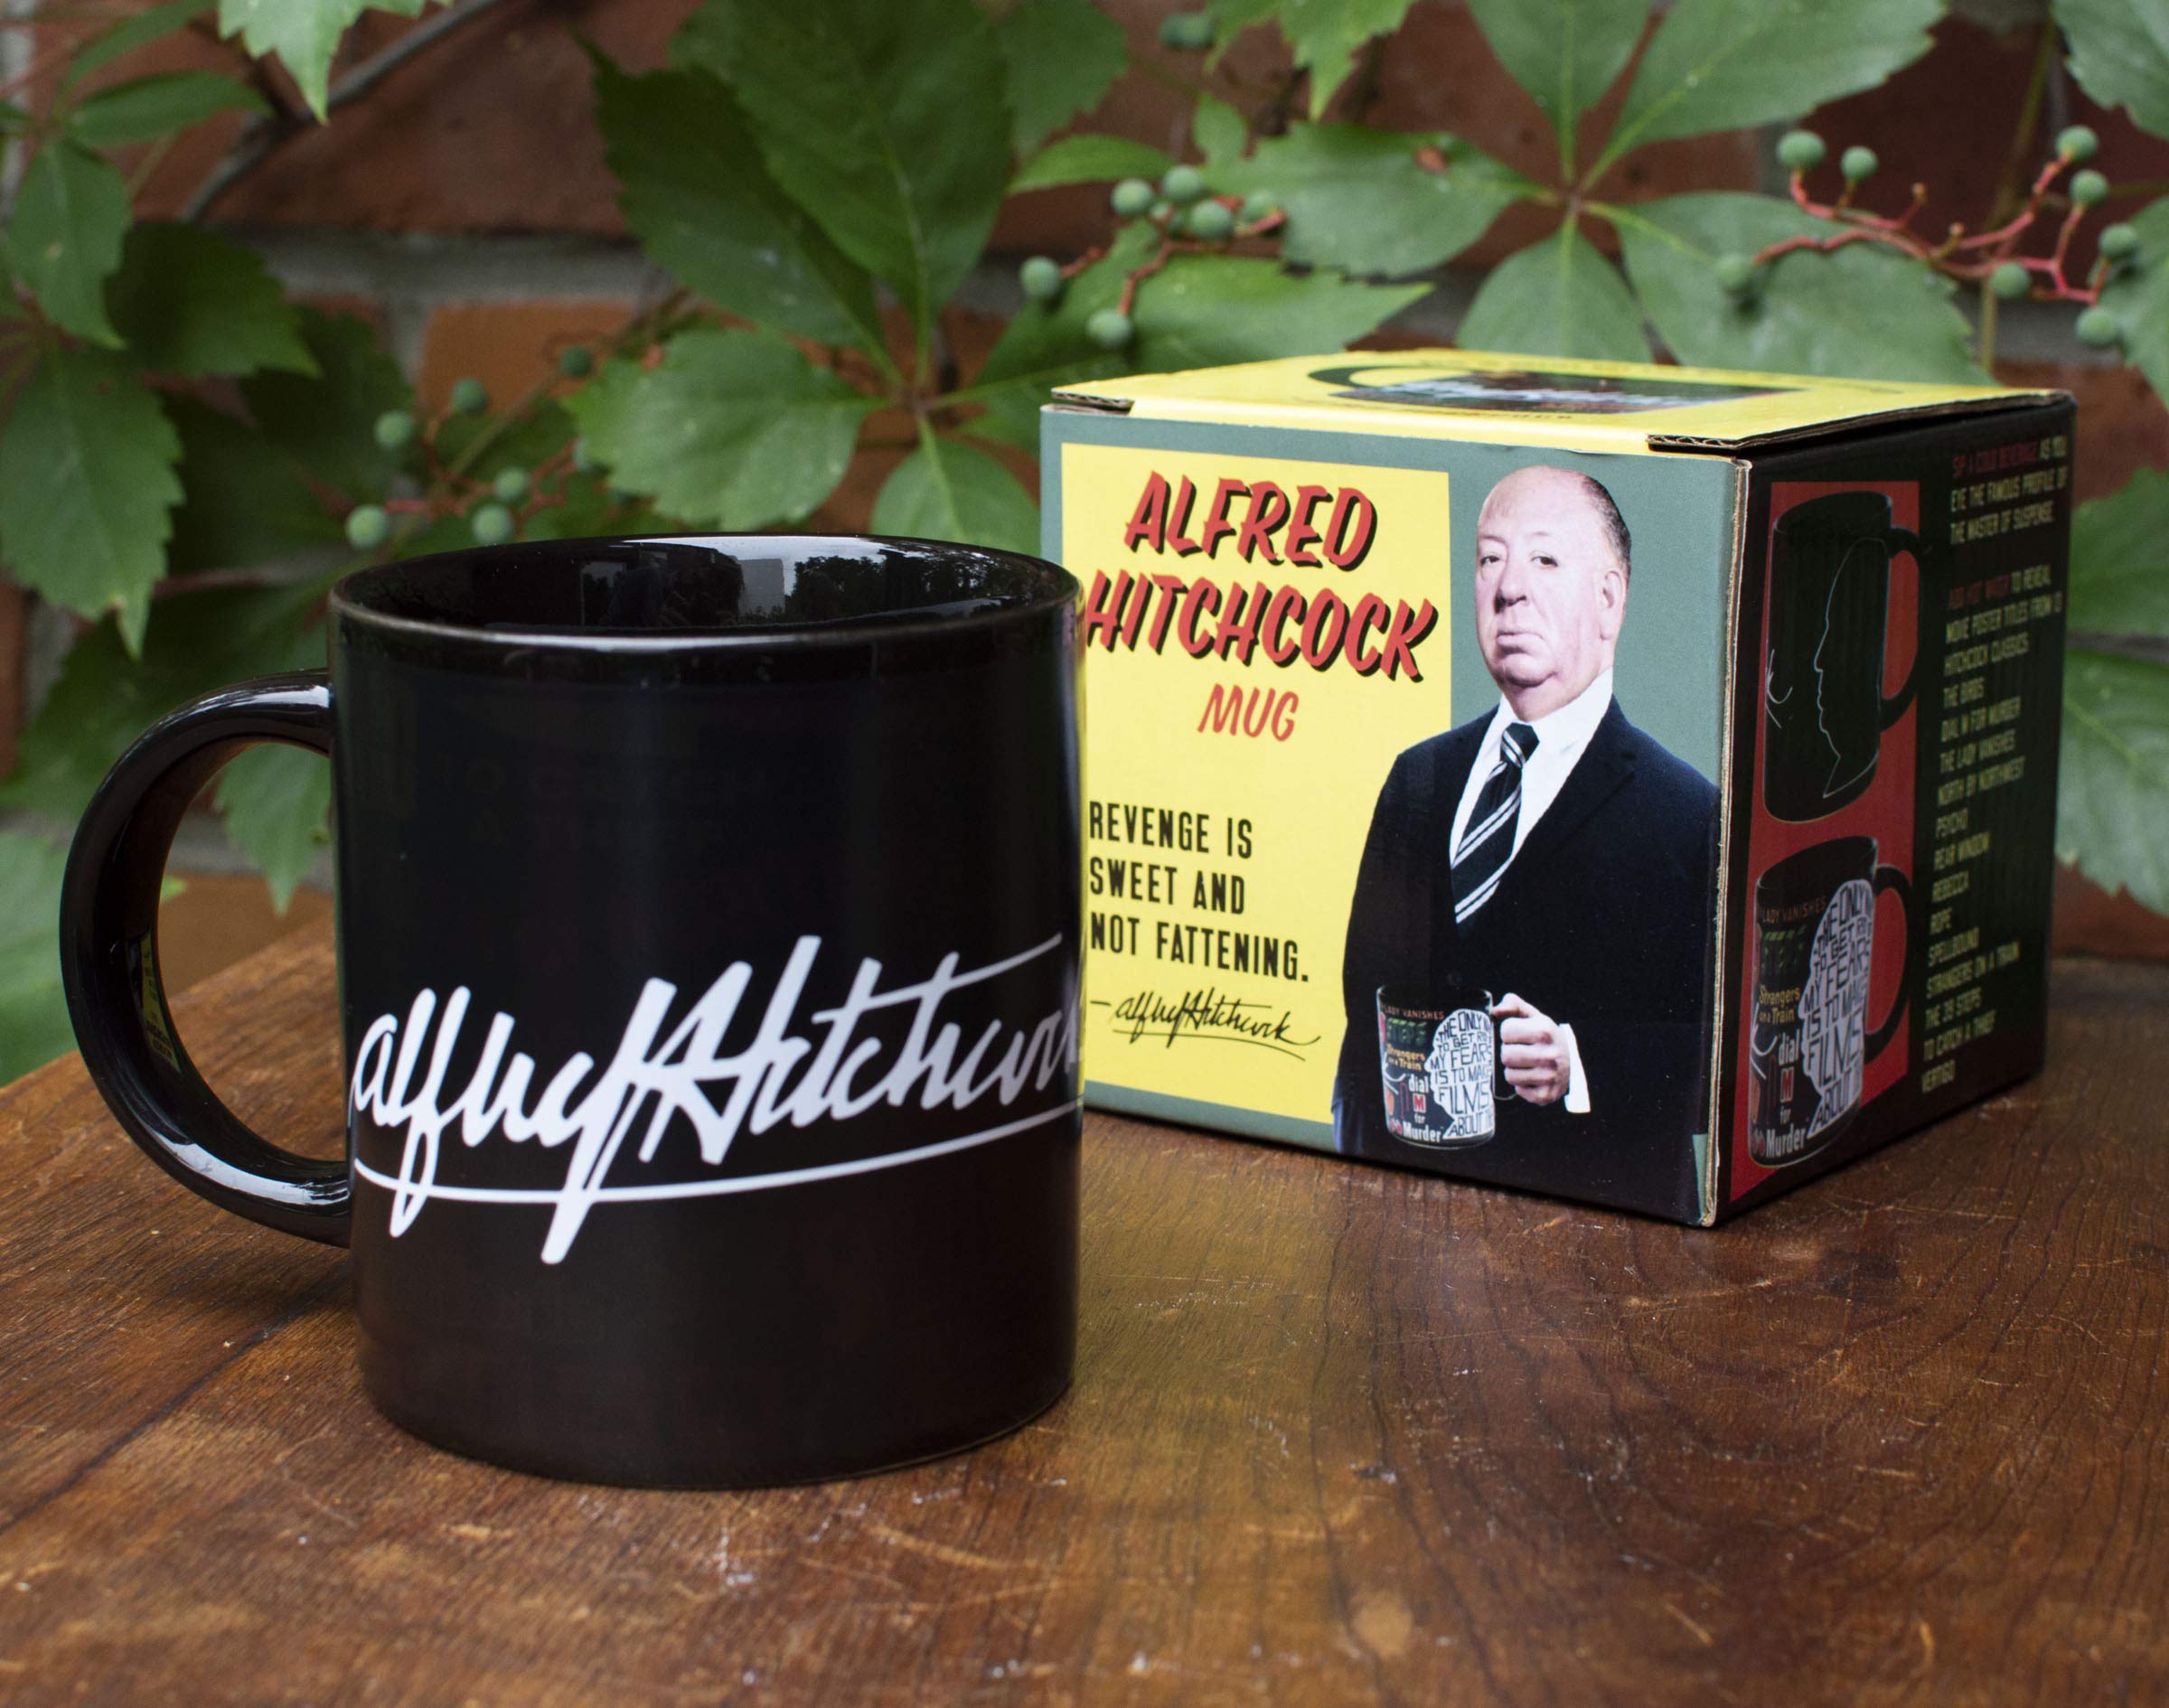 Heat Changing Alfred Hitchcock Movie Titles Mug - Add Coffee and His Most Famous Films Appear